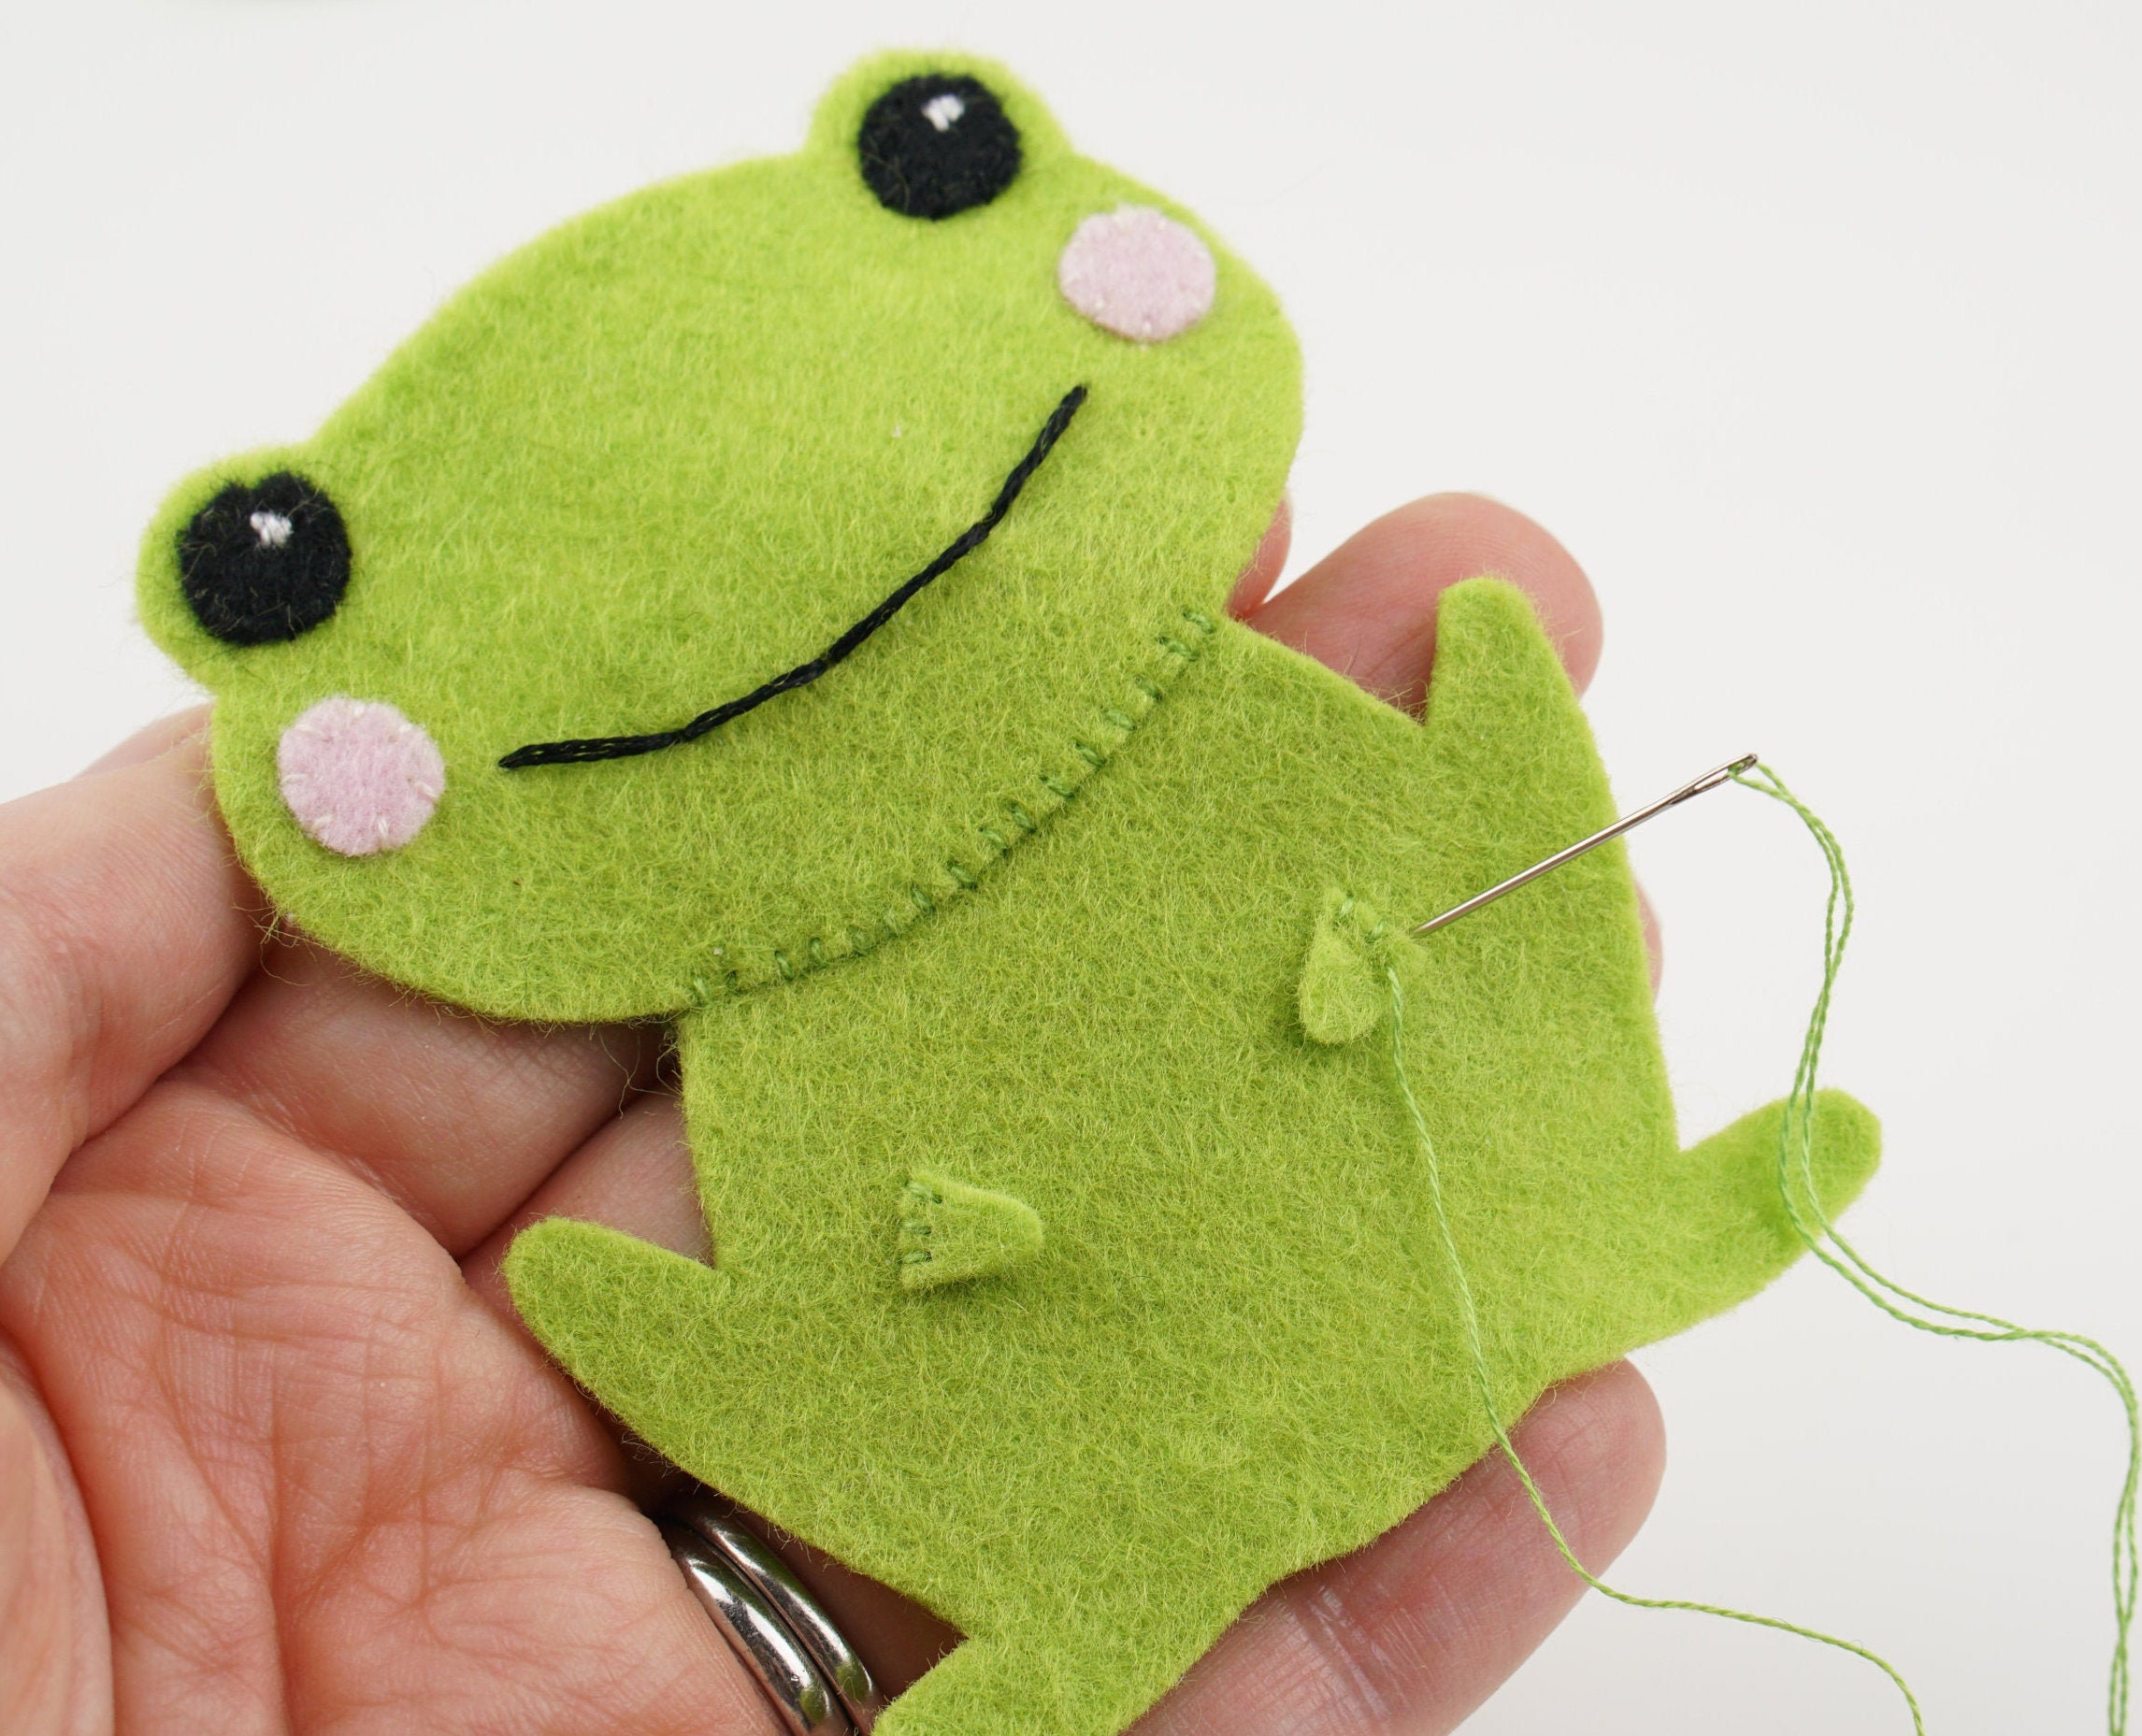 Sew Felt Frogs - Sew A Softie 2021 - Molly and Mama